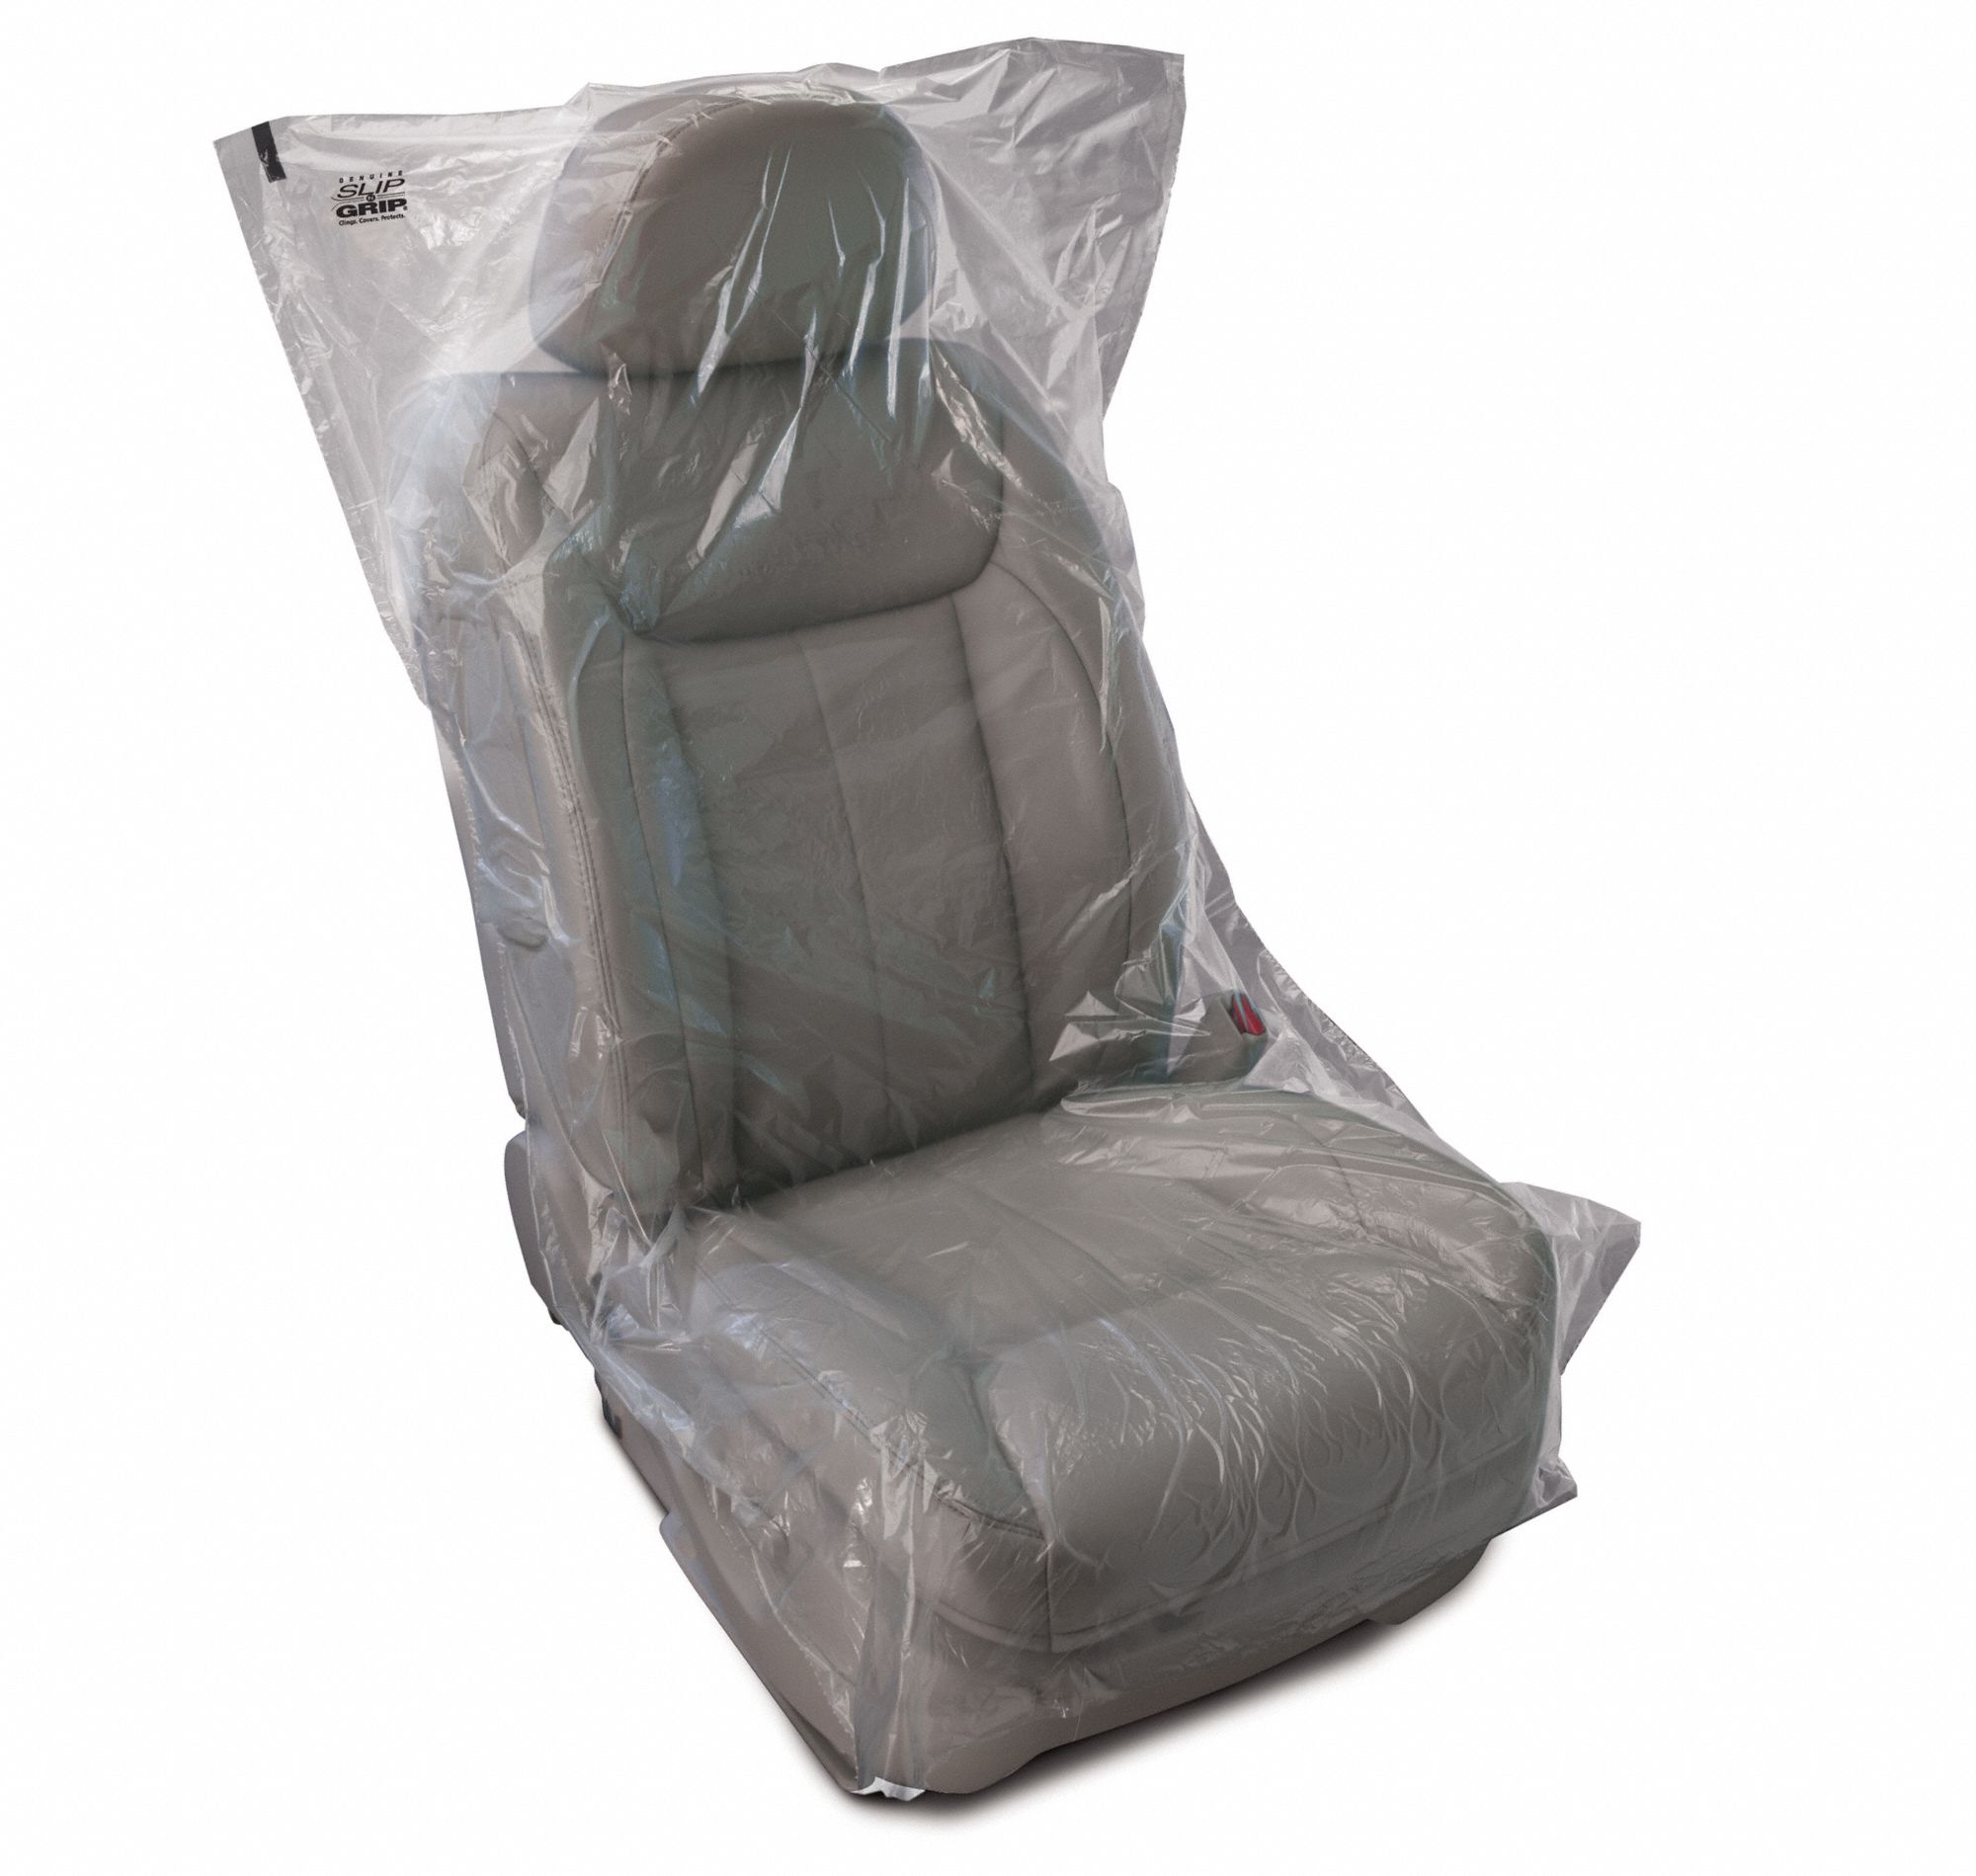 Seat Cover: Clear, Plastic, 32 in x 56 in, 250 Pack Qty, Box